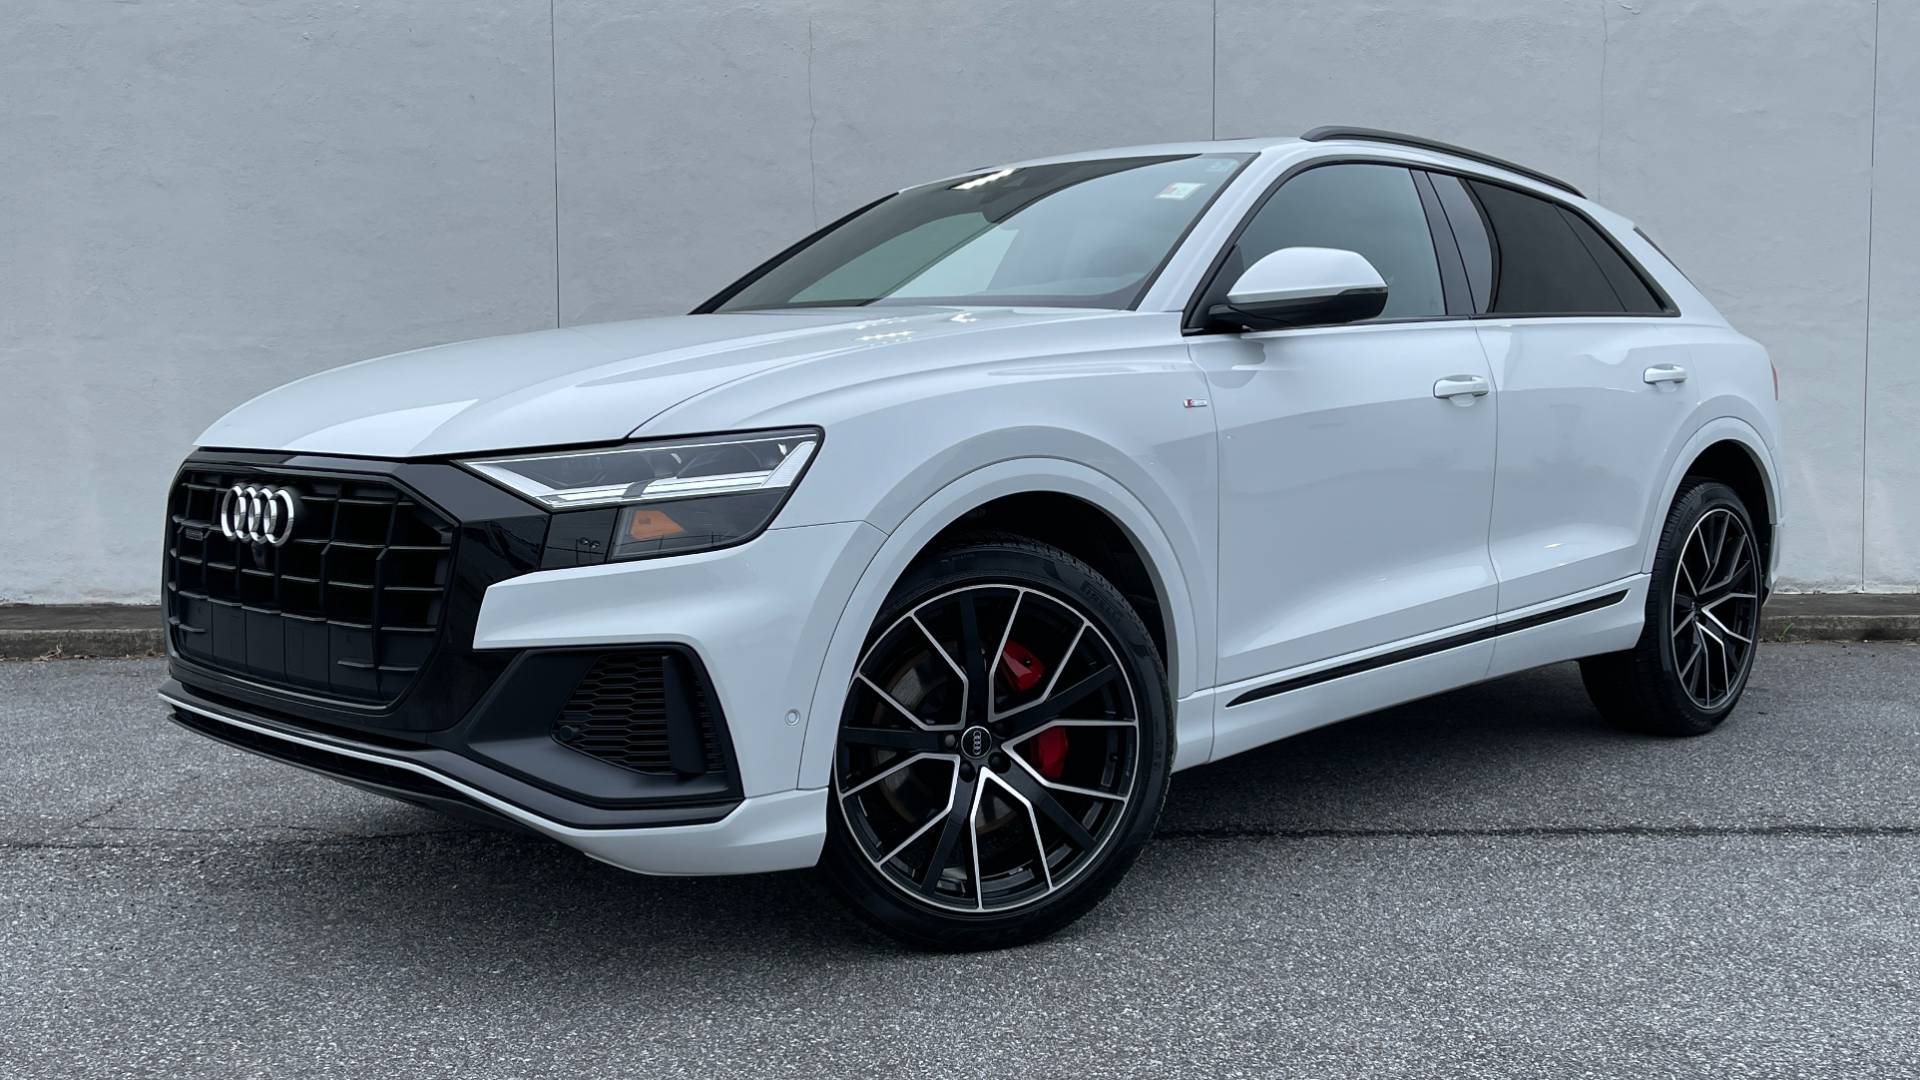 Used 2020 Audi Q8 PREMIUM PLUS / NAV / S-LINE / TOWING / BLACK OPTIC / B&O SND / REARVIEW for sale Sold at Formula Imports in Charlotte NC 28227 9